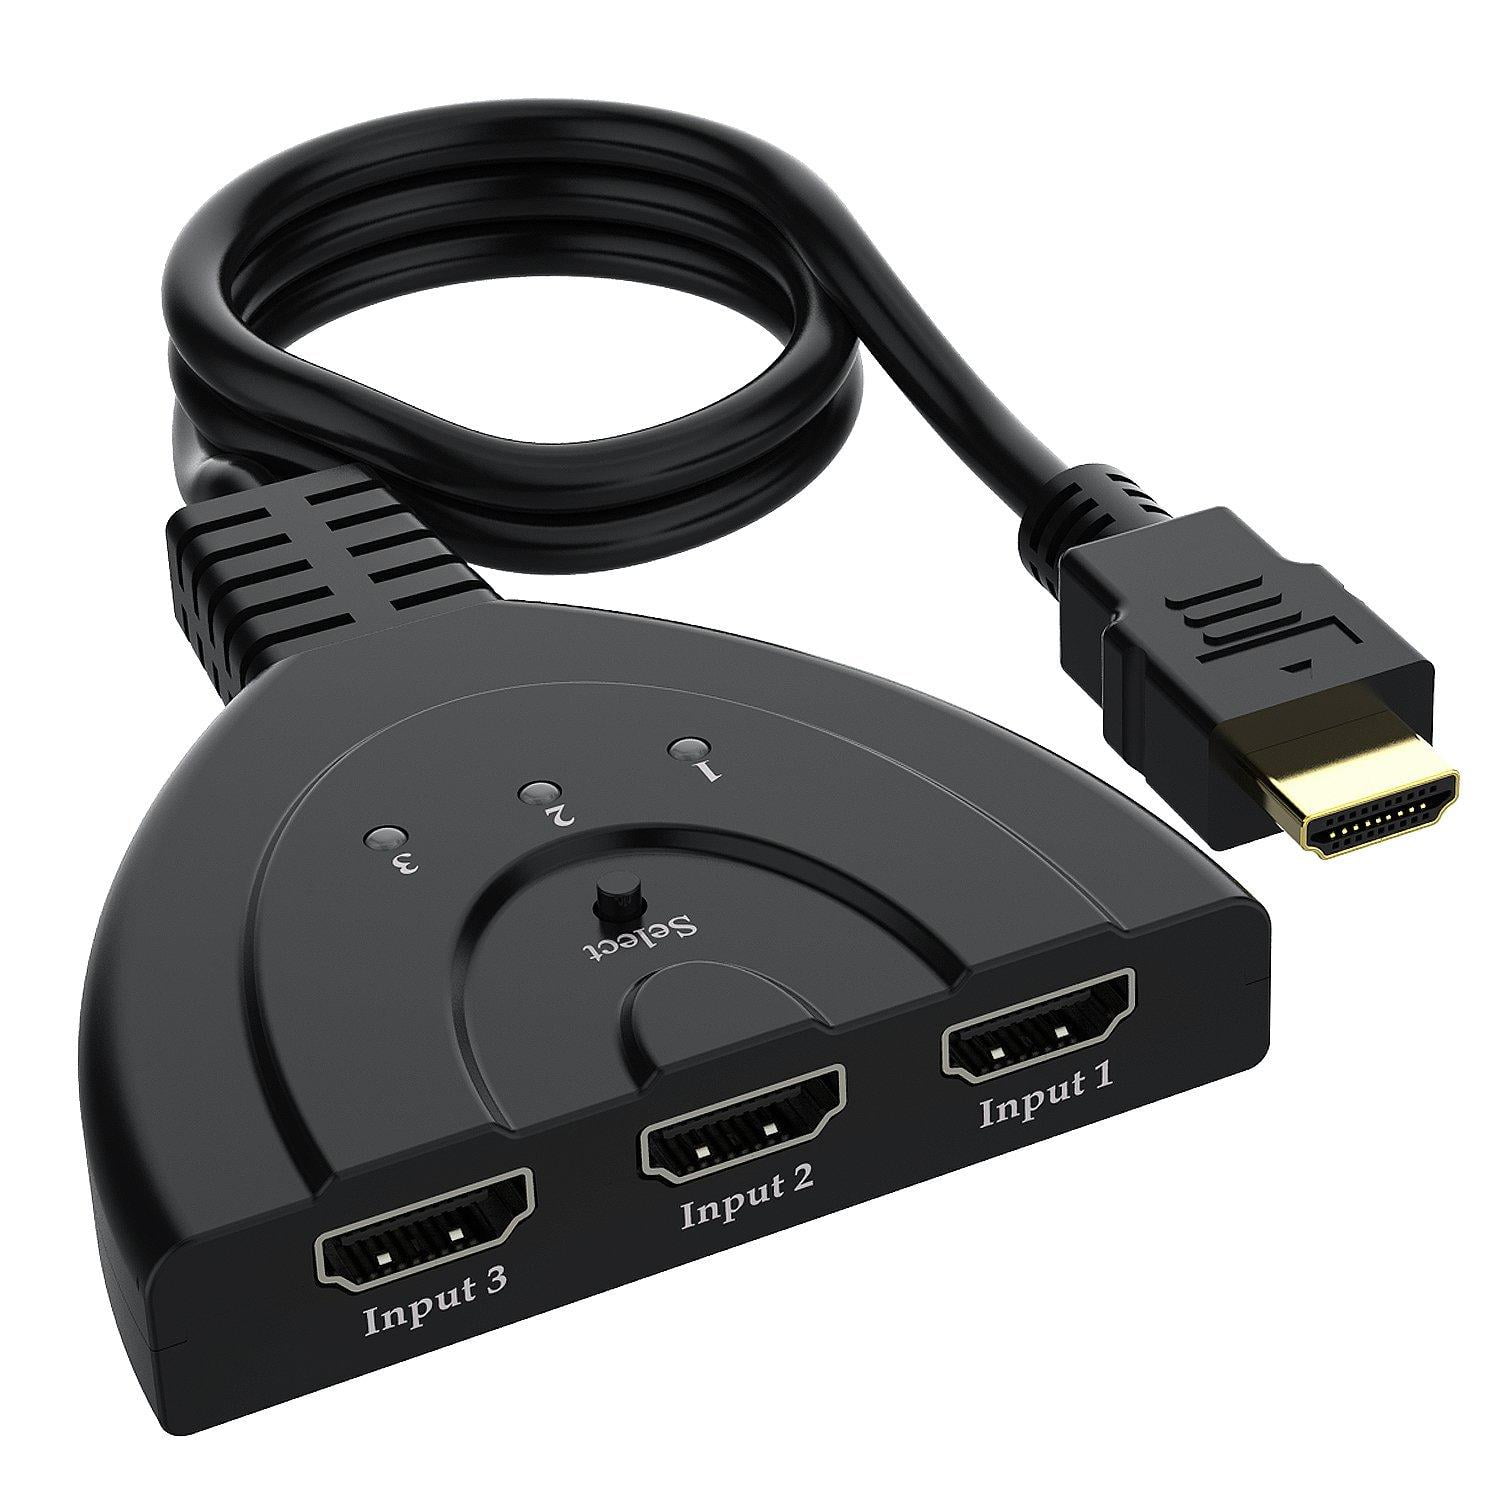 tung stemme symmetri 3-Port HDMI Splitter Switch Cable 2ft 3 In 1 out Auto High Speed Switcher  Splitter Support 3D,1080P For HDMI TV, PS3, Xbox One,etc - Walmart.com